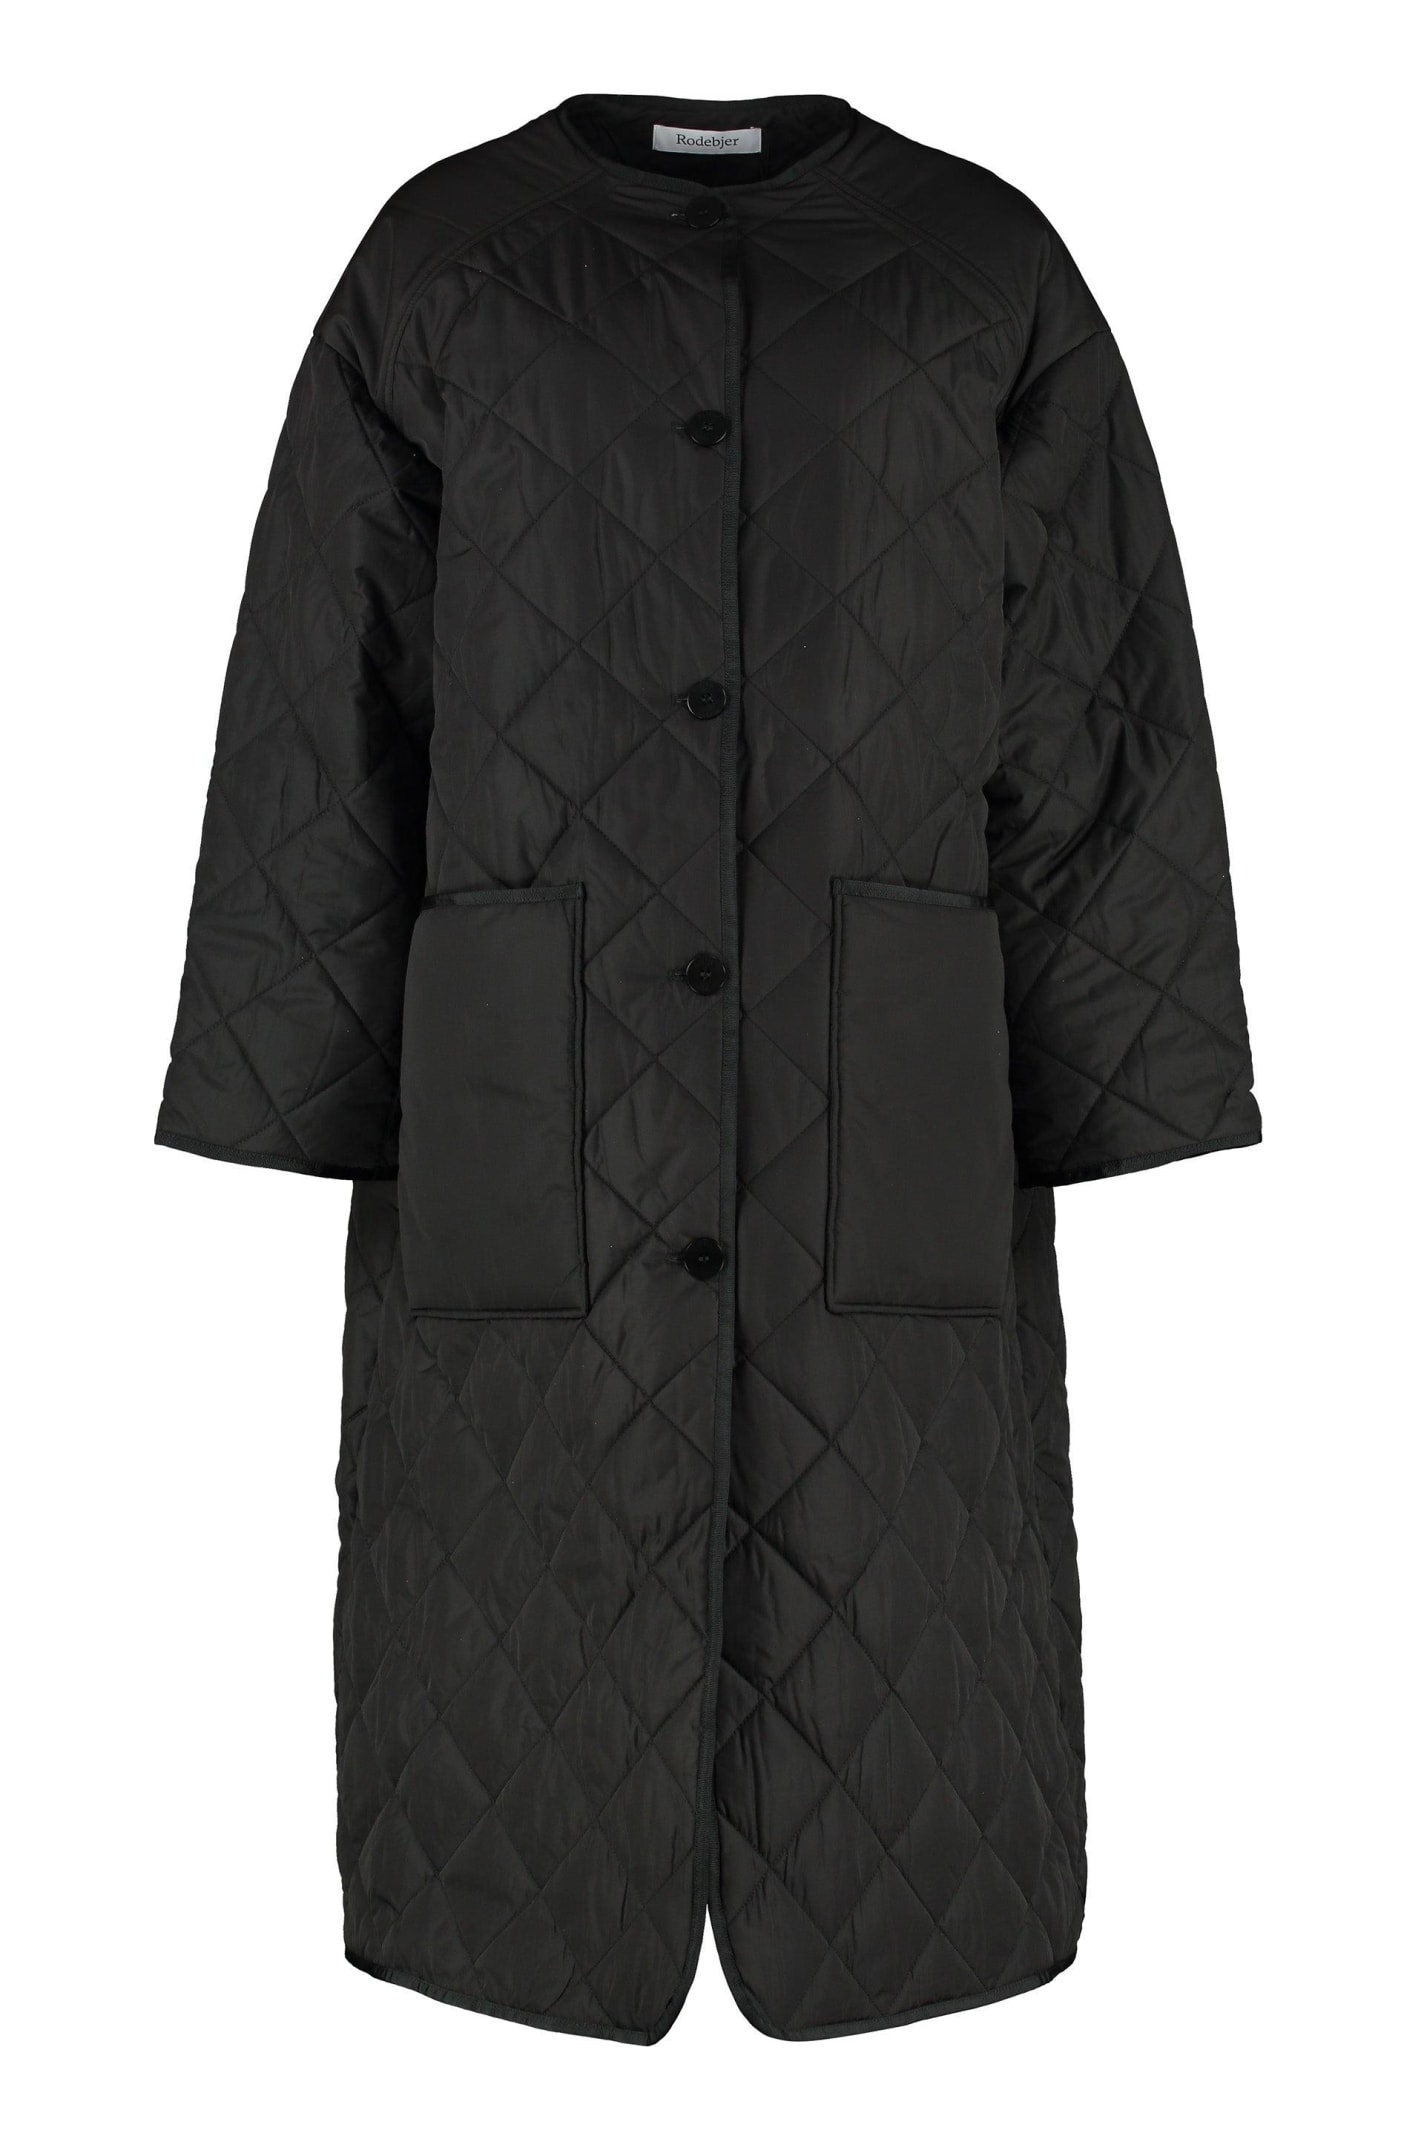 Rodebjer Single-breasted Quilted Coat